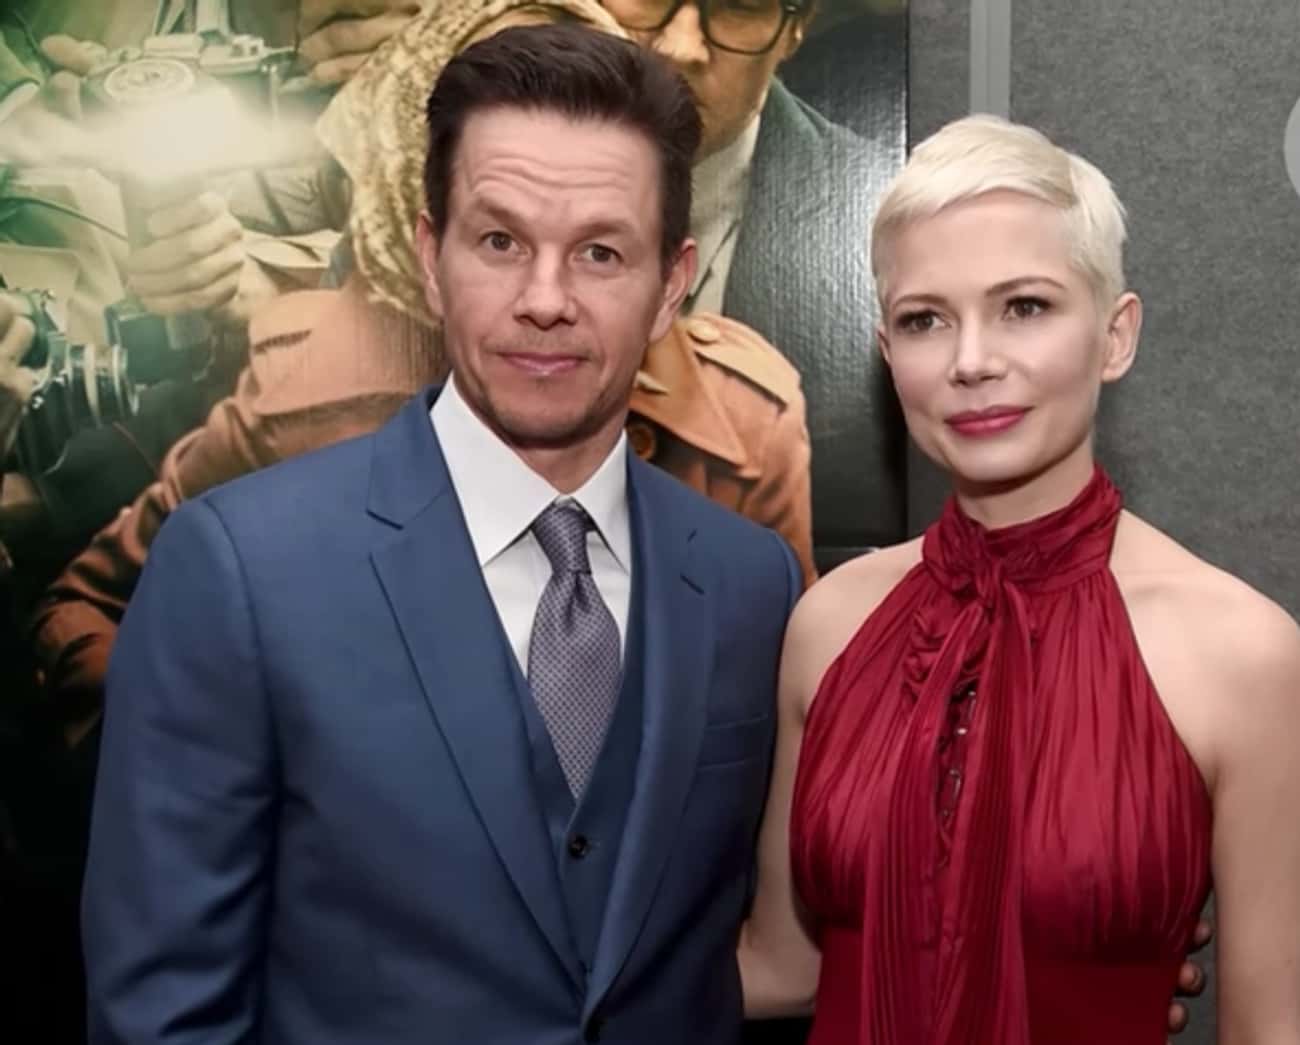 Michelle Williams Was Paid Less Than 1% Of Mark Wahlberg's Wage For 'All The Money in the World'